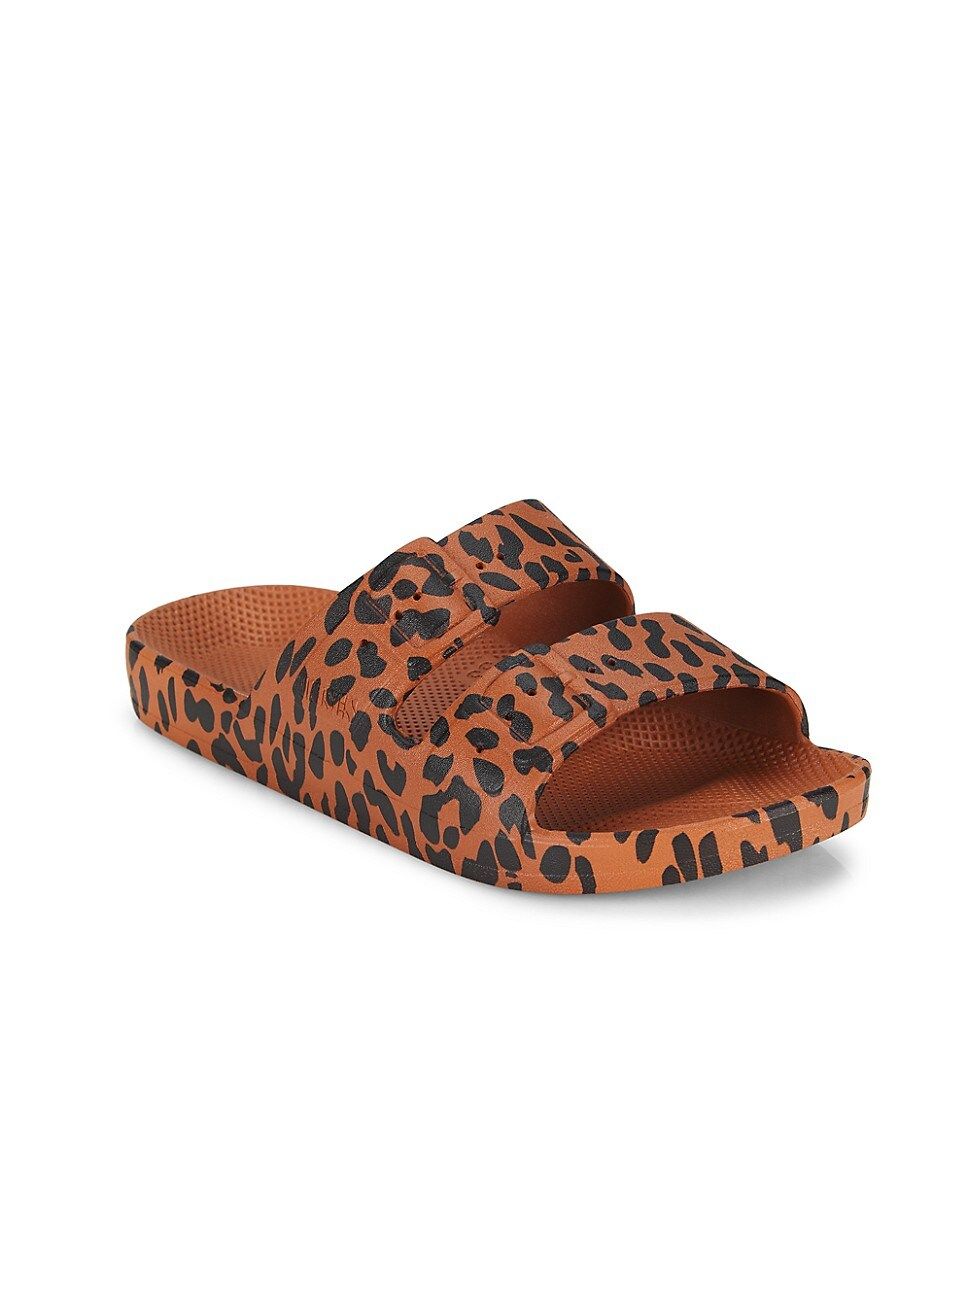 Freedom Moses Little Girl's and Girl's Leopard Slide Sandals - Leo Toffee - Size 10 (Toddler) | Saks Fifth Avenue